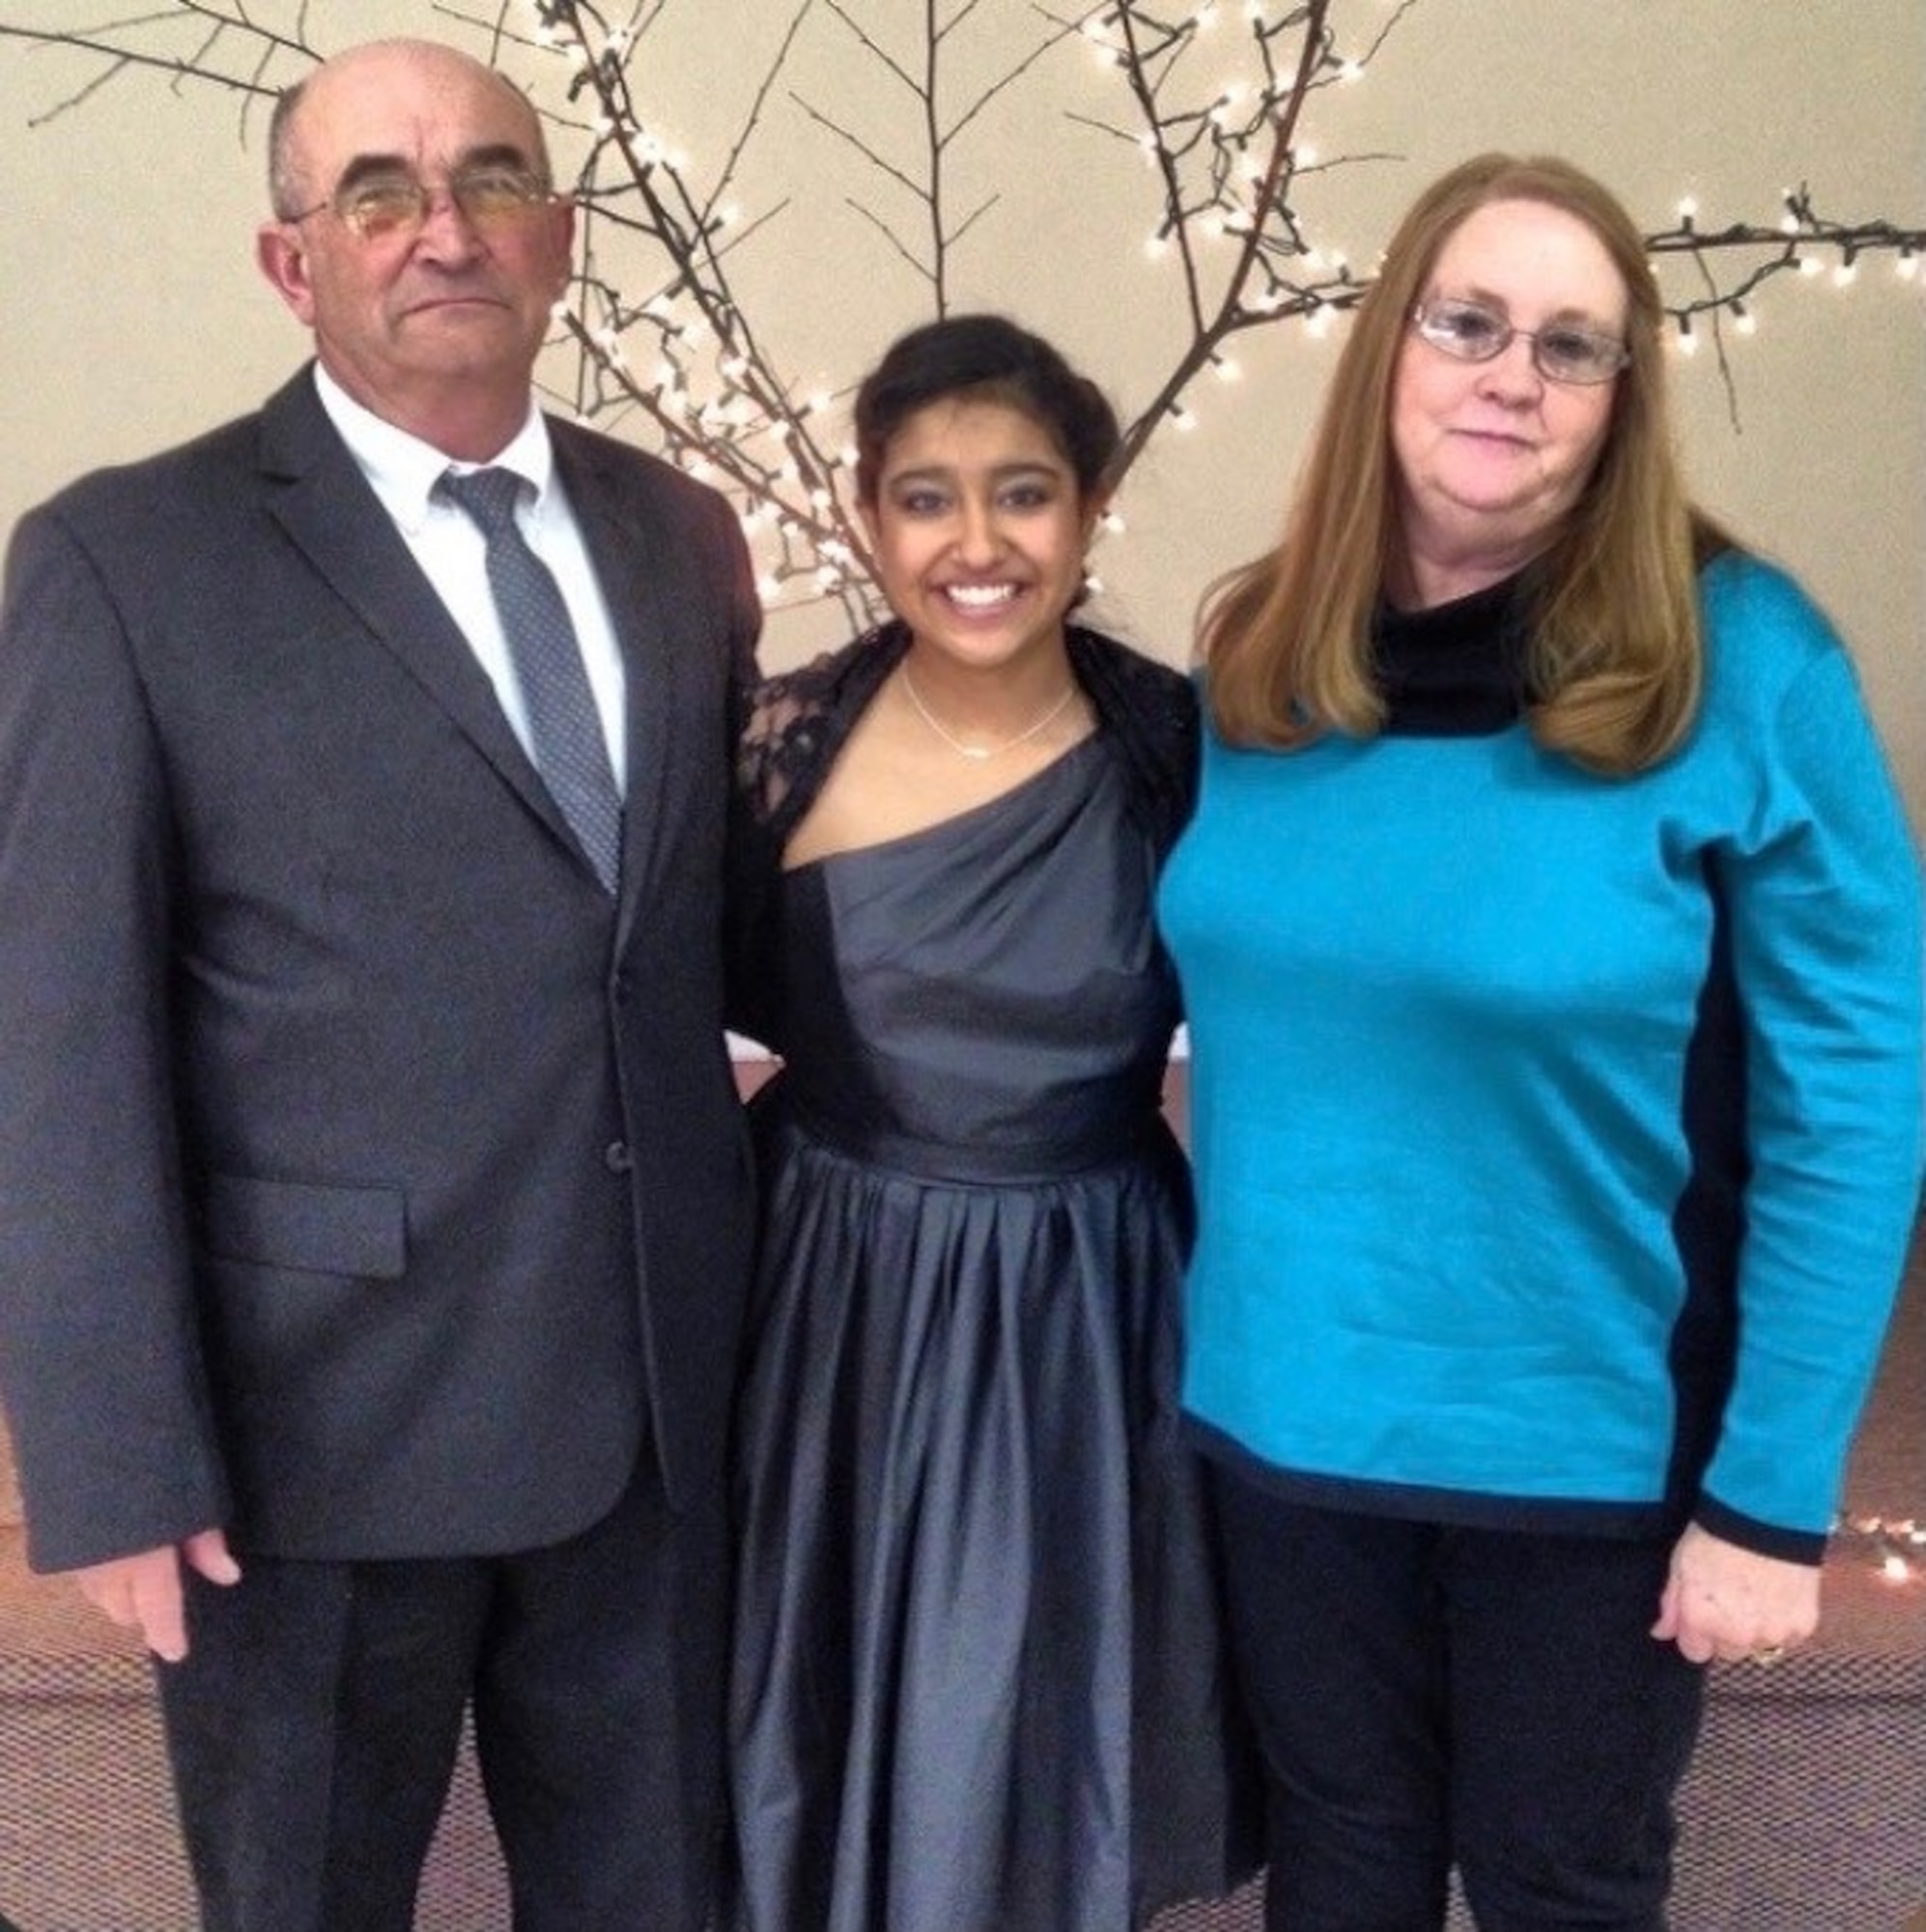 Airman 1st Class Jessica Makenna Martinez Greenlee, 36th Force Support Squadron services journeyman, poses for a photo at her niece’s wedding with her parents, Lonny and Donna Greenlee at Spartanburg, South Carolina, Feb. 16, 2014. Greenlee was placed in foster care at the age of three with three of her siblings. After being in a few homes, a couple from Lubbock, Texas showed interest in adopting all four of them, giving them the chance to grow up together with the company of 19 other children they had and adopted. (Courtesy photo)